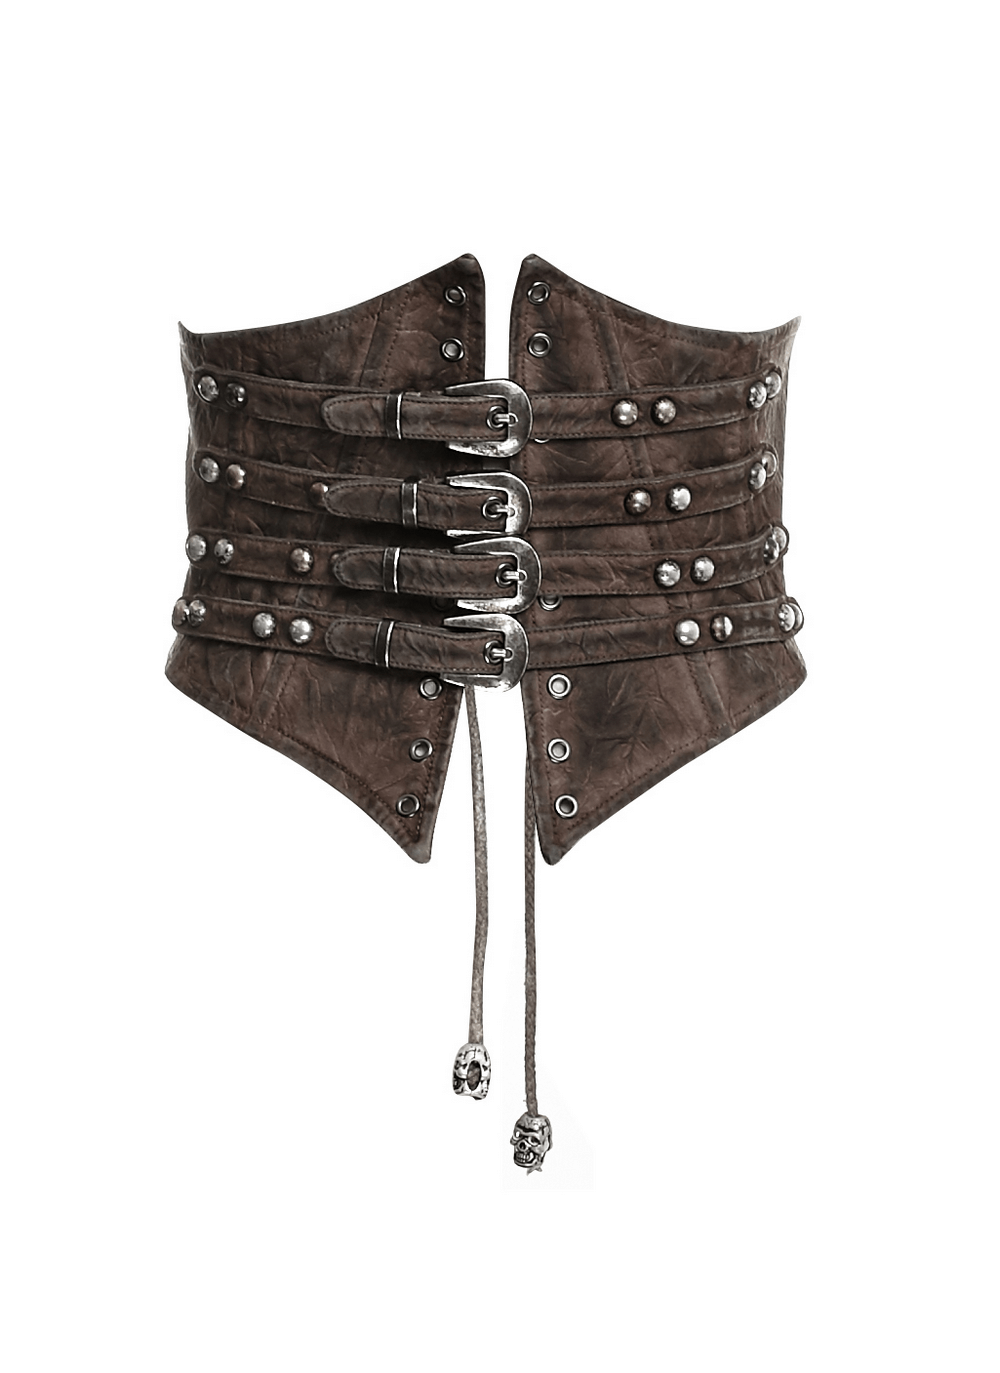 Vintage Female Corset Belt with Buckles and Rivets - HARD'N'HEAVY